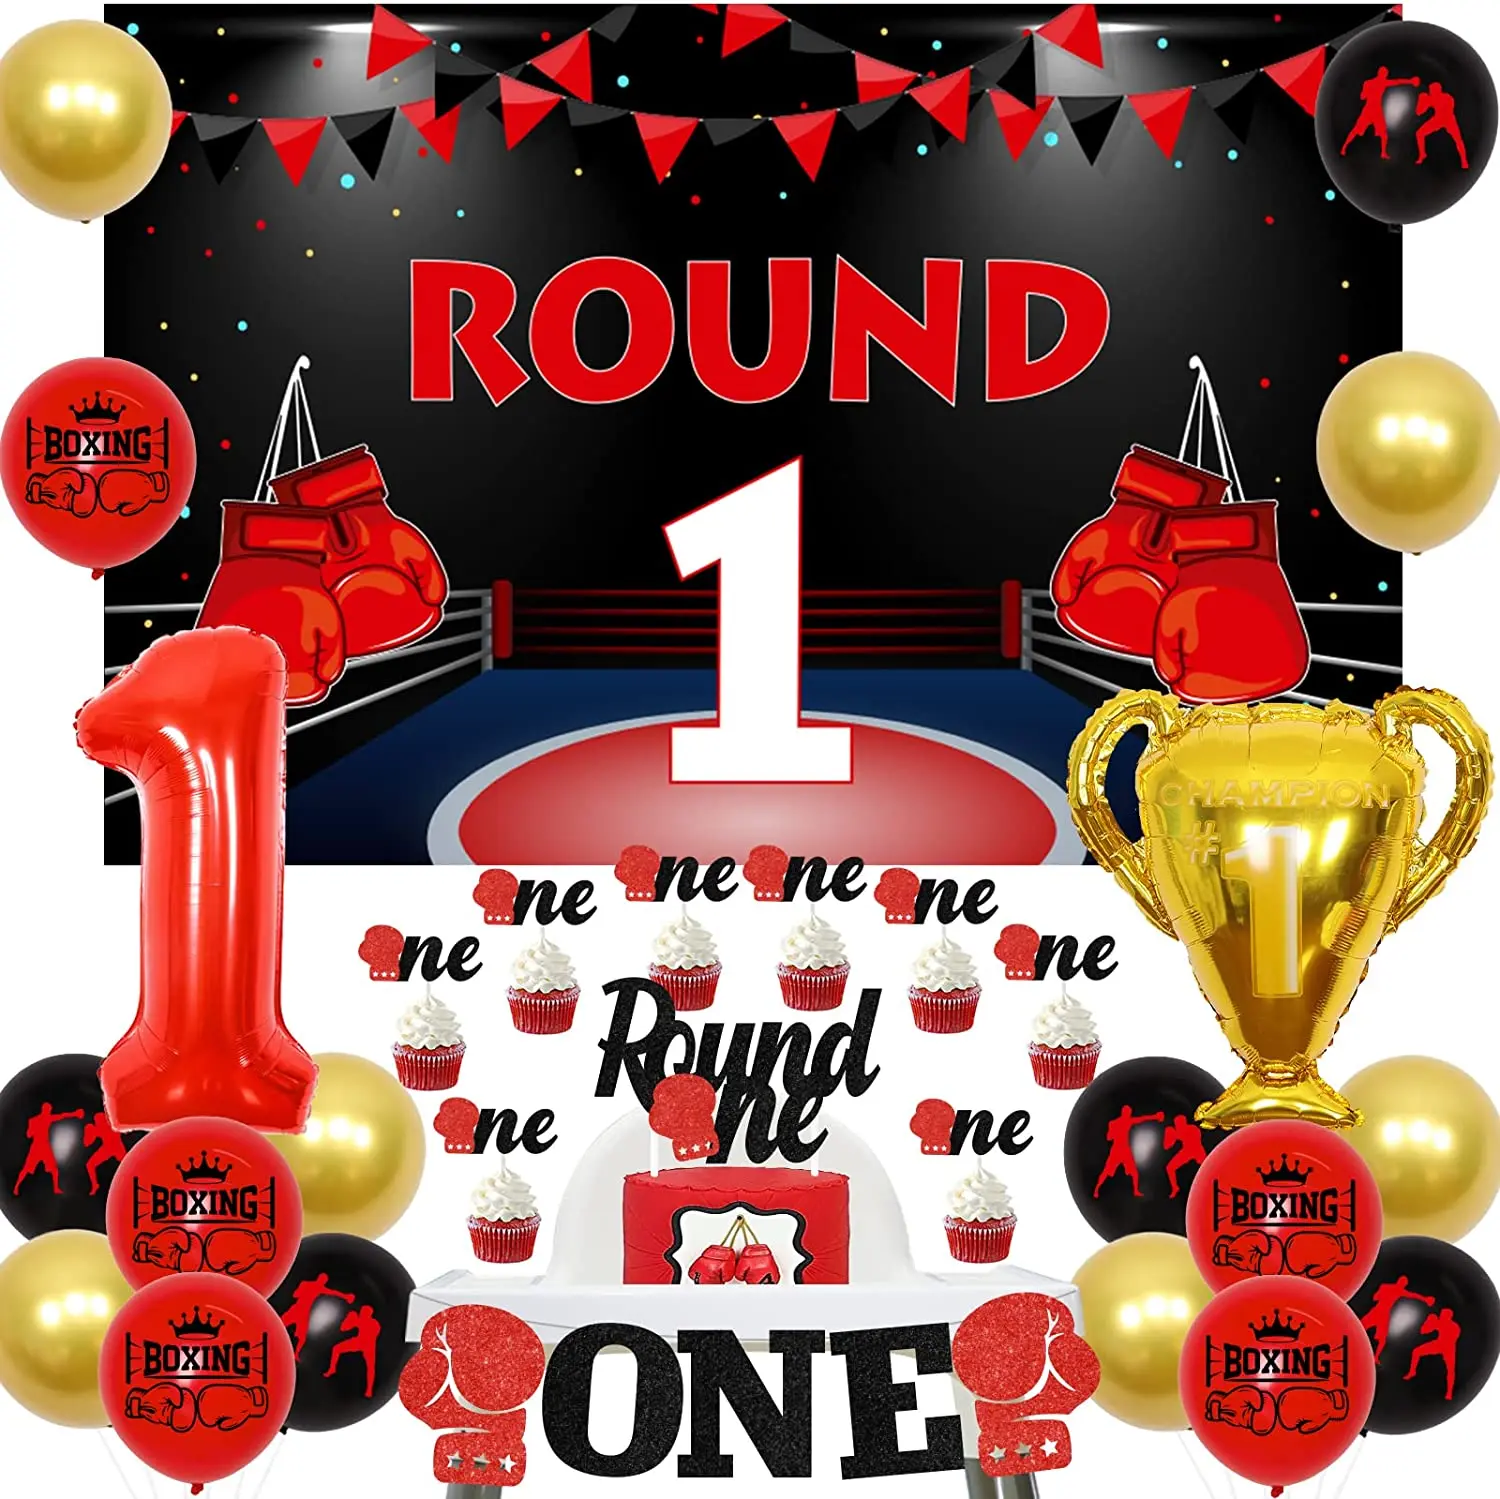 

Boxing 1st Birthday Party Decorations Round 1 Backdrop Cake toppers & Highchair Banner Trophy Balloons for Sports Theme Supplies